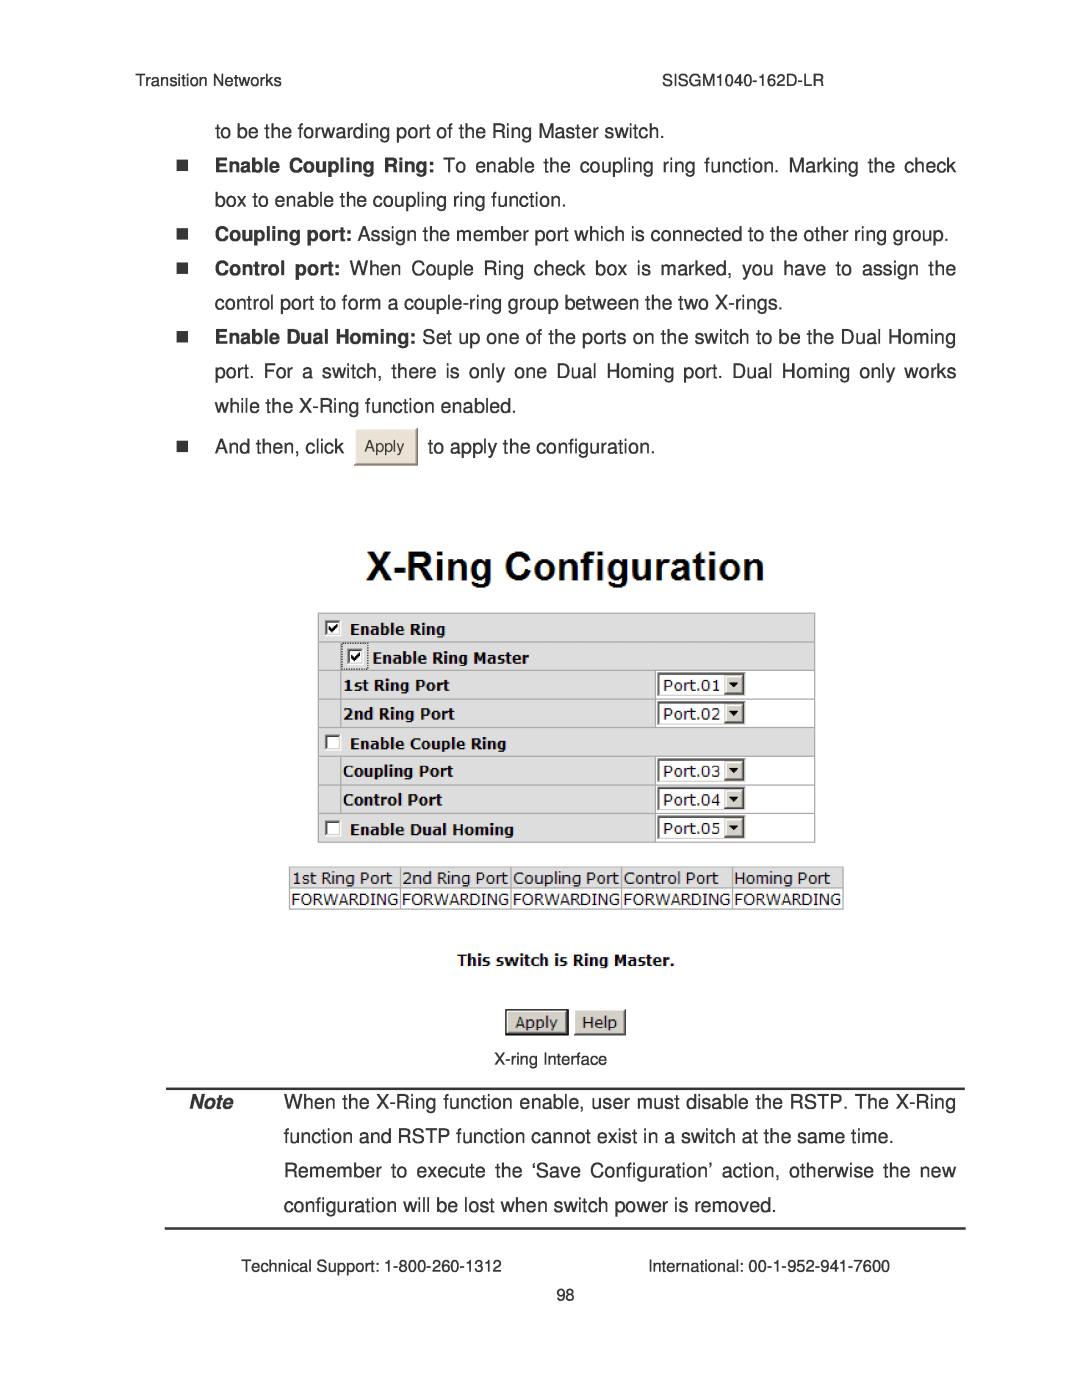 Transition Networks SISGM1040-162D manual to be the forwarding port of the Ring Master switch 